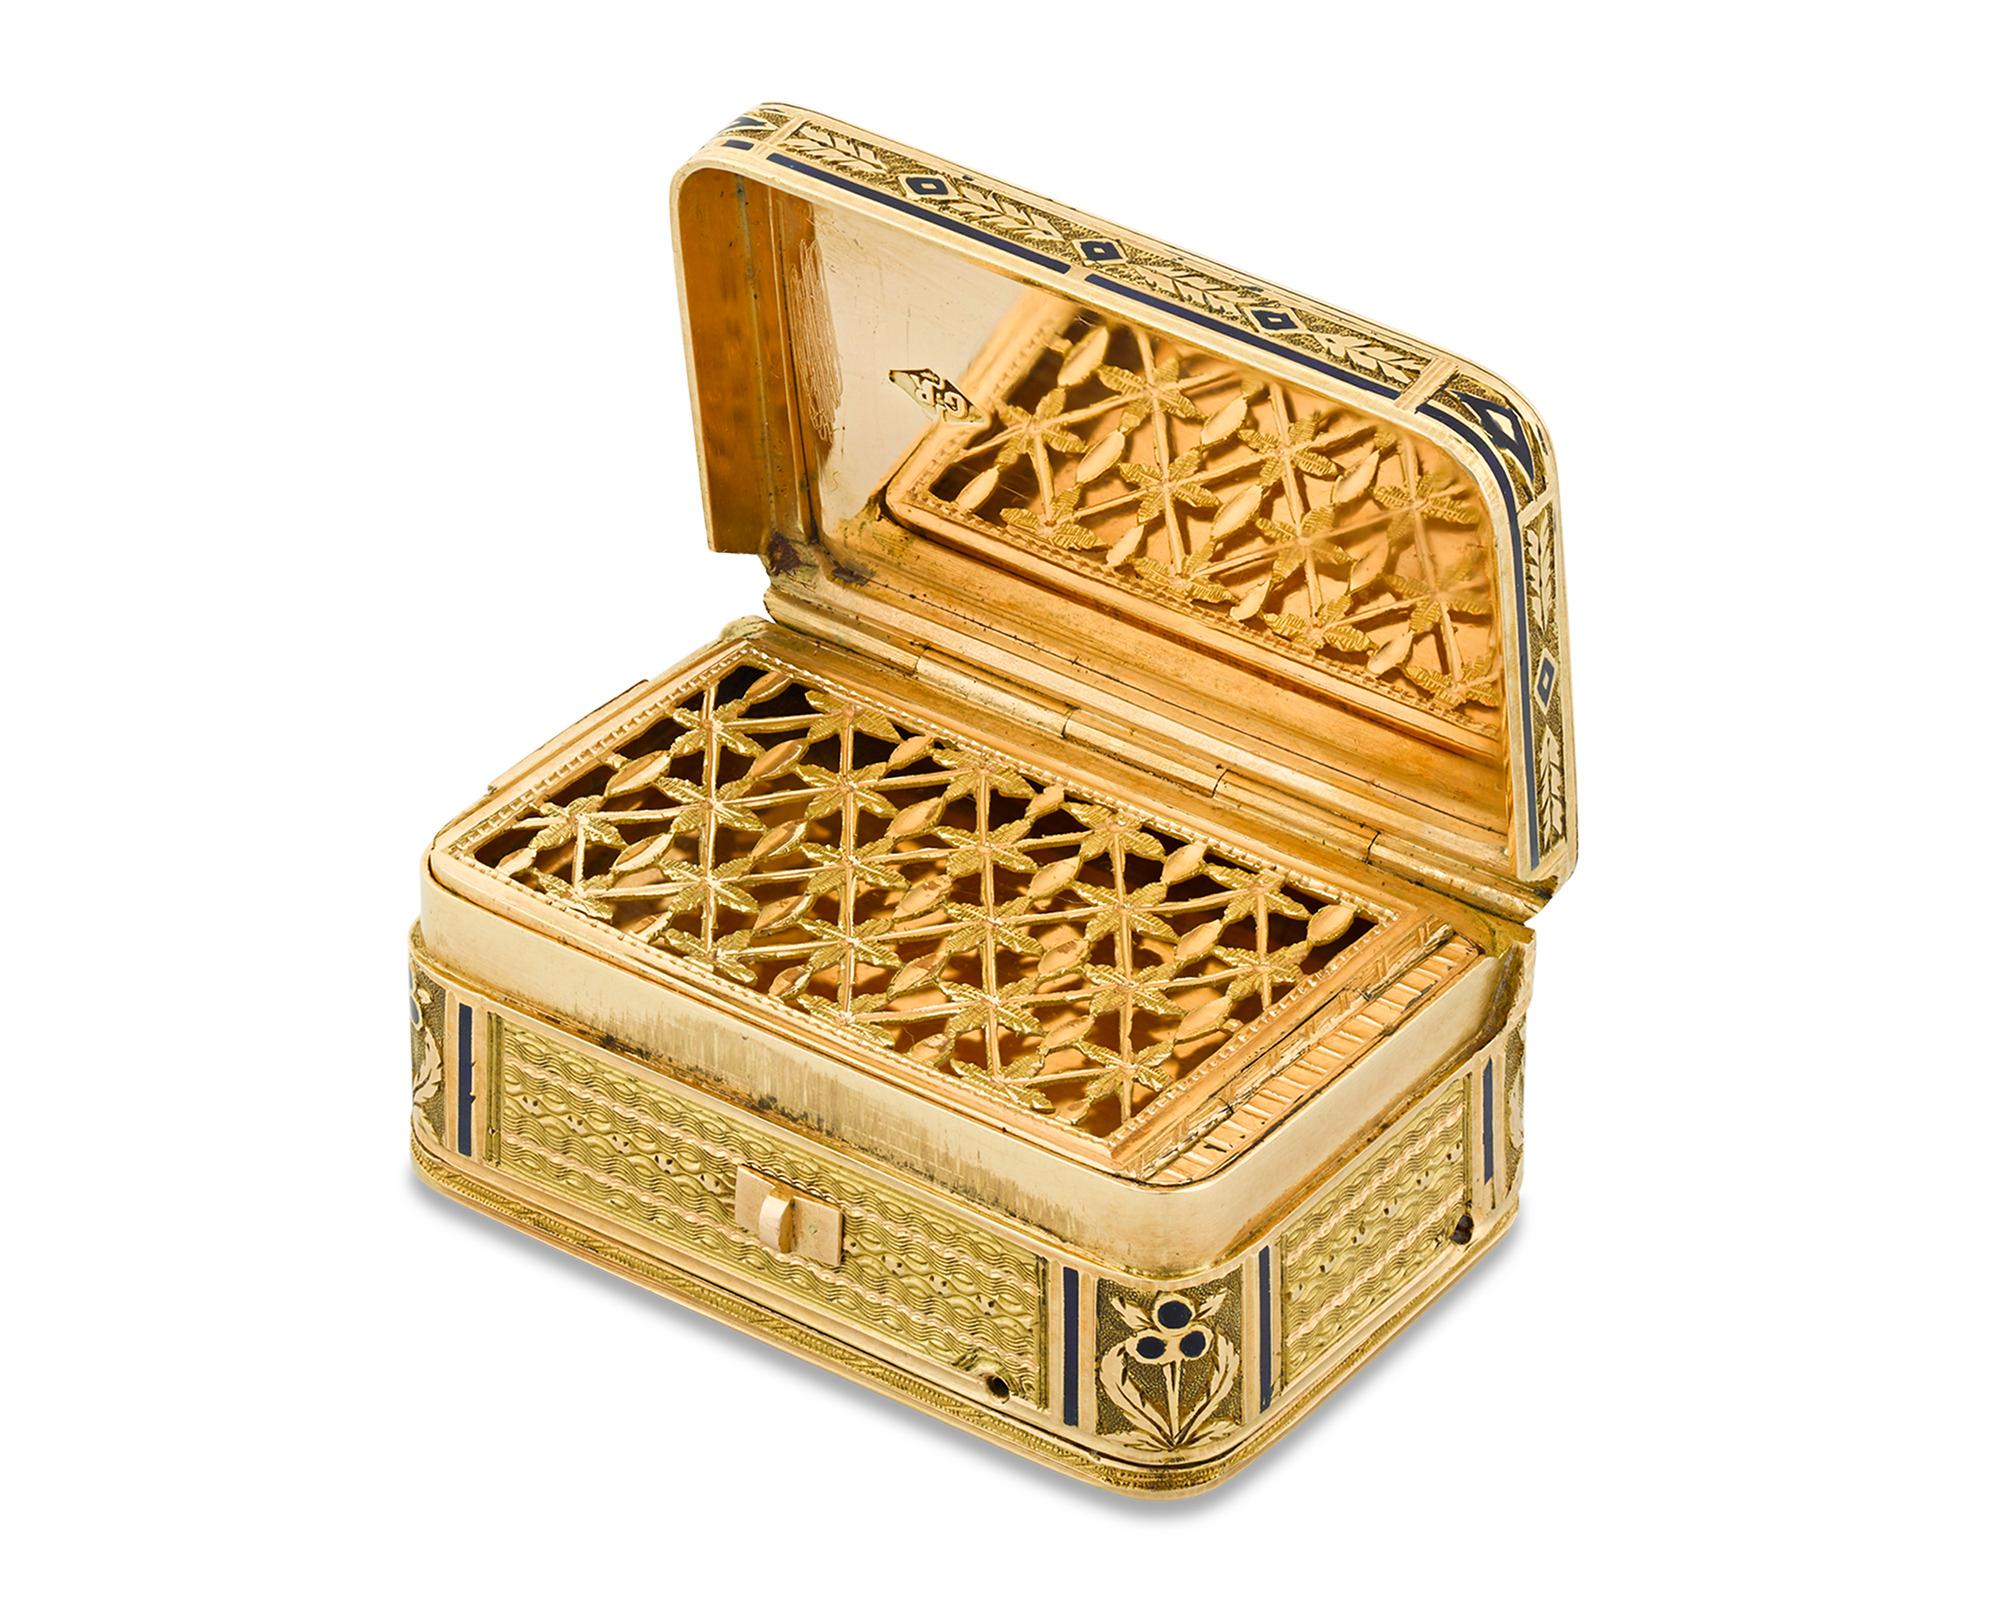 This early 19th century Swiss gold vinaigrette has the charming addition of a musical mechanism. The entire box is crafted of 14-karat yellow gold enveloped in delicate engine-turned work, black champlevé enamel and engraved detailing. The musical